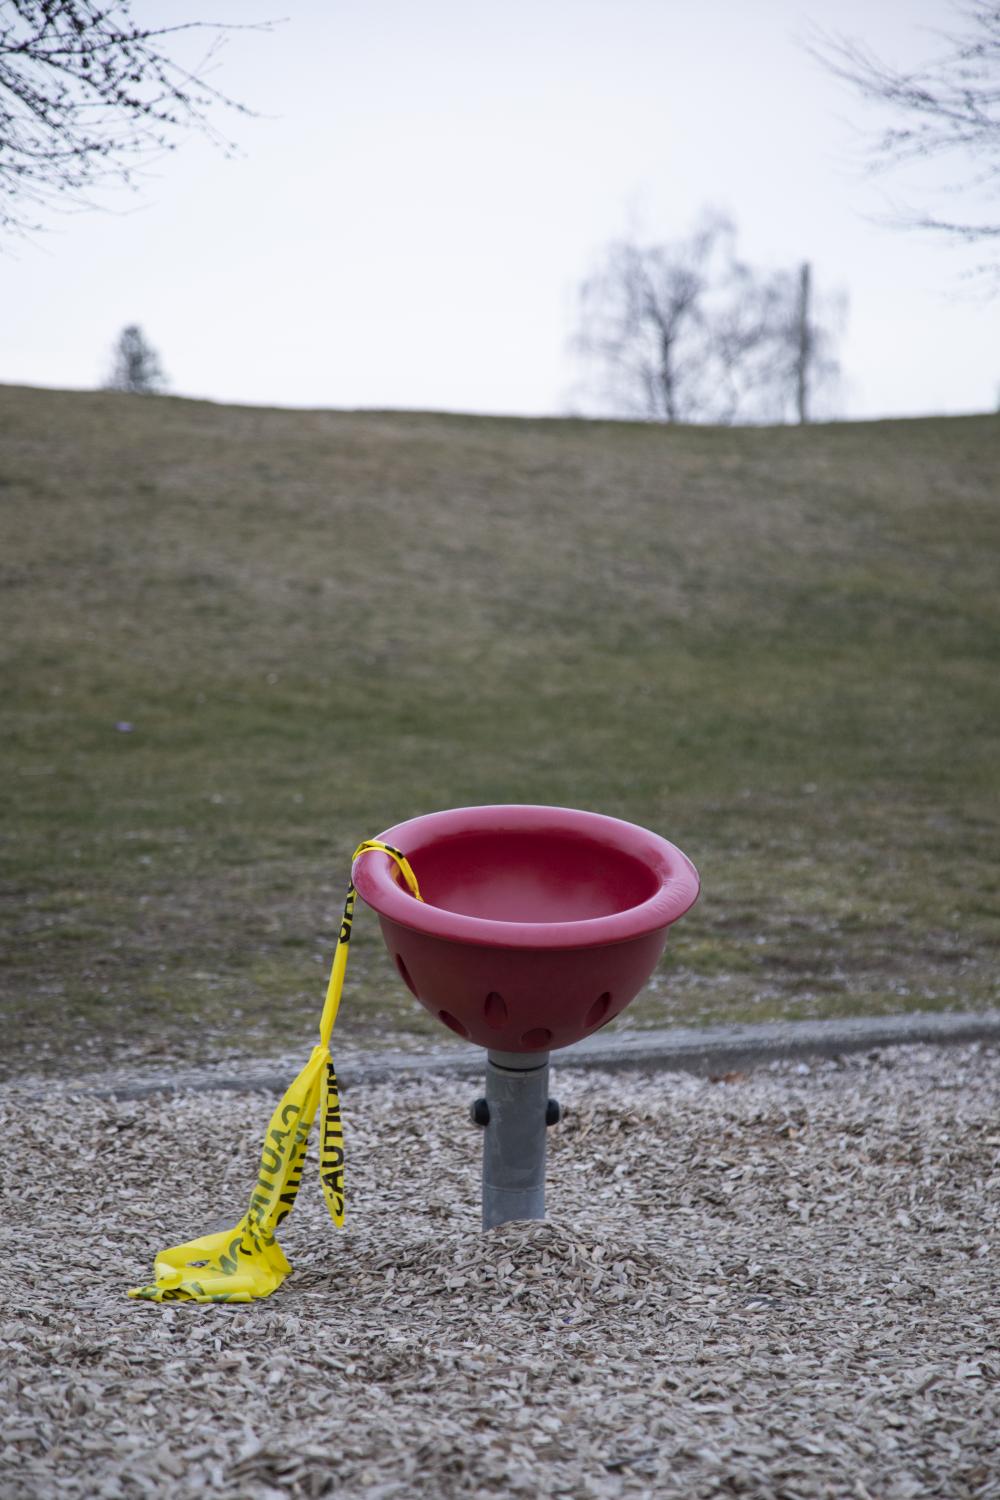 Until Further Notice - A playground at Ray Perrault Park in North Vancouver,...